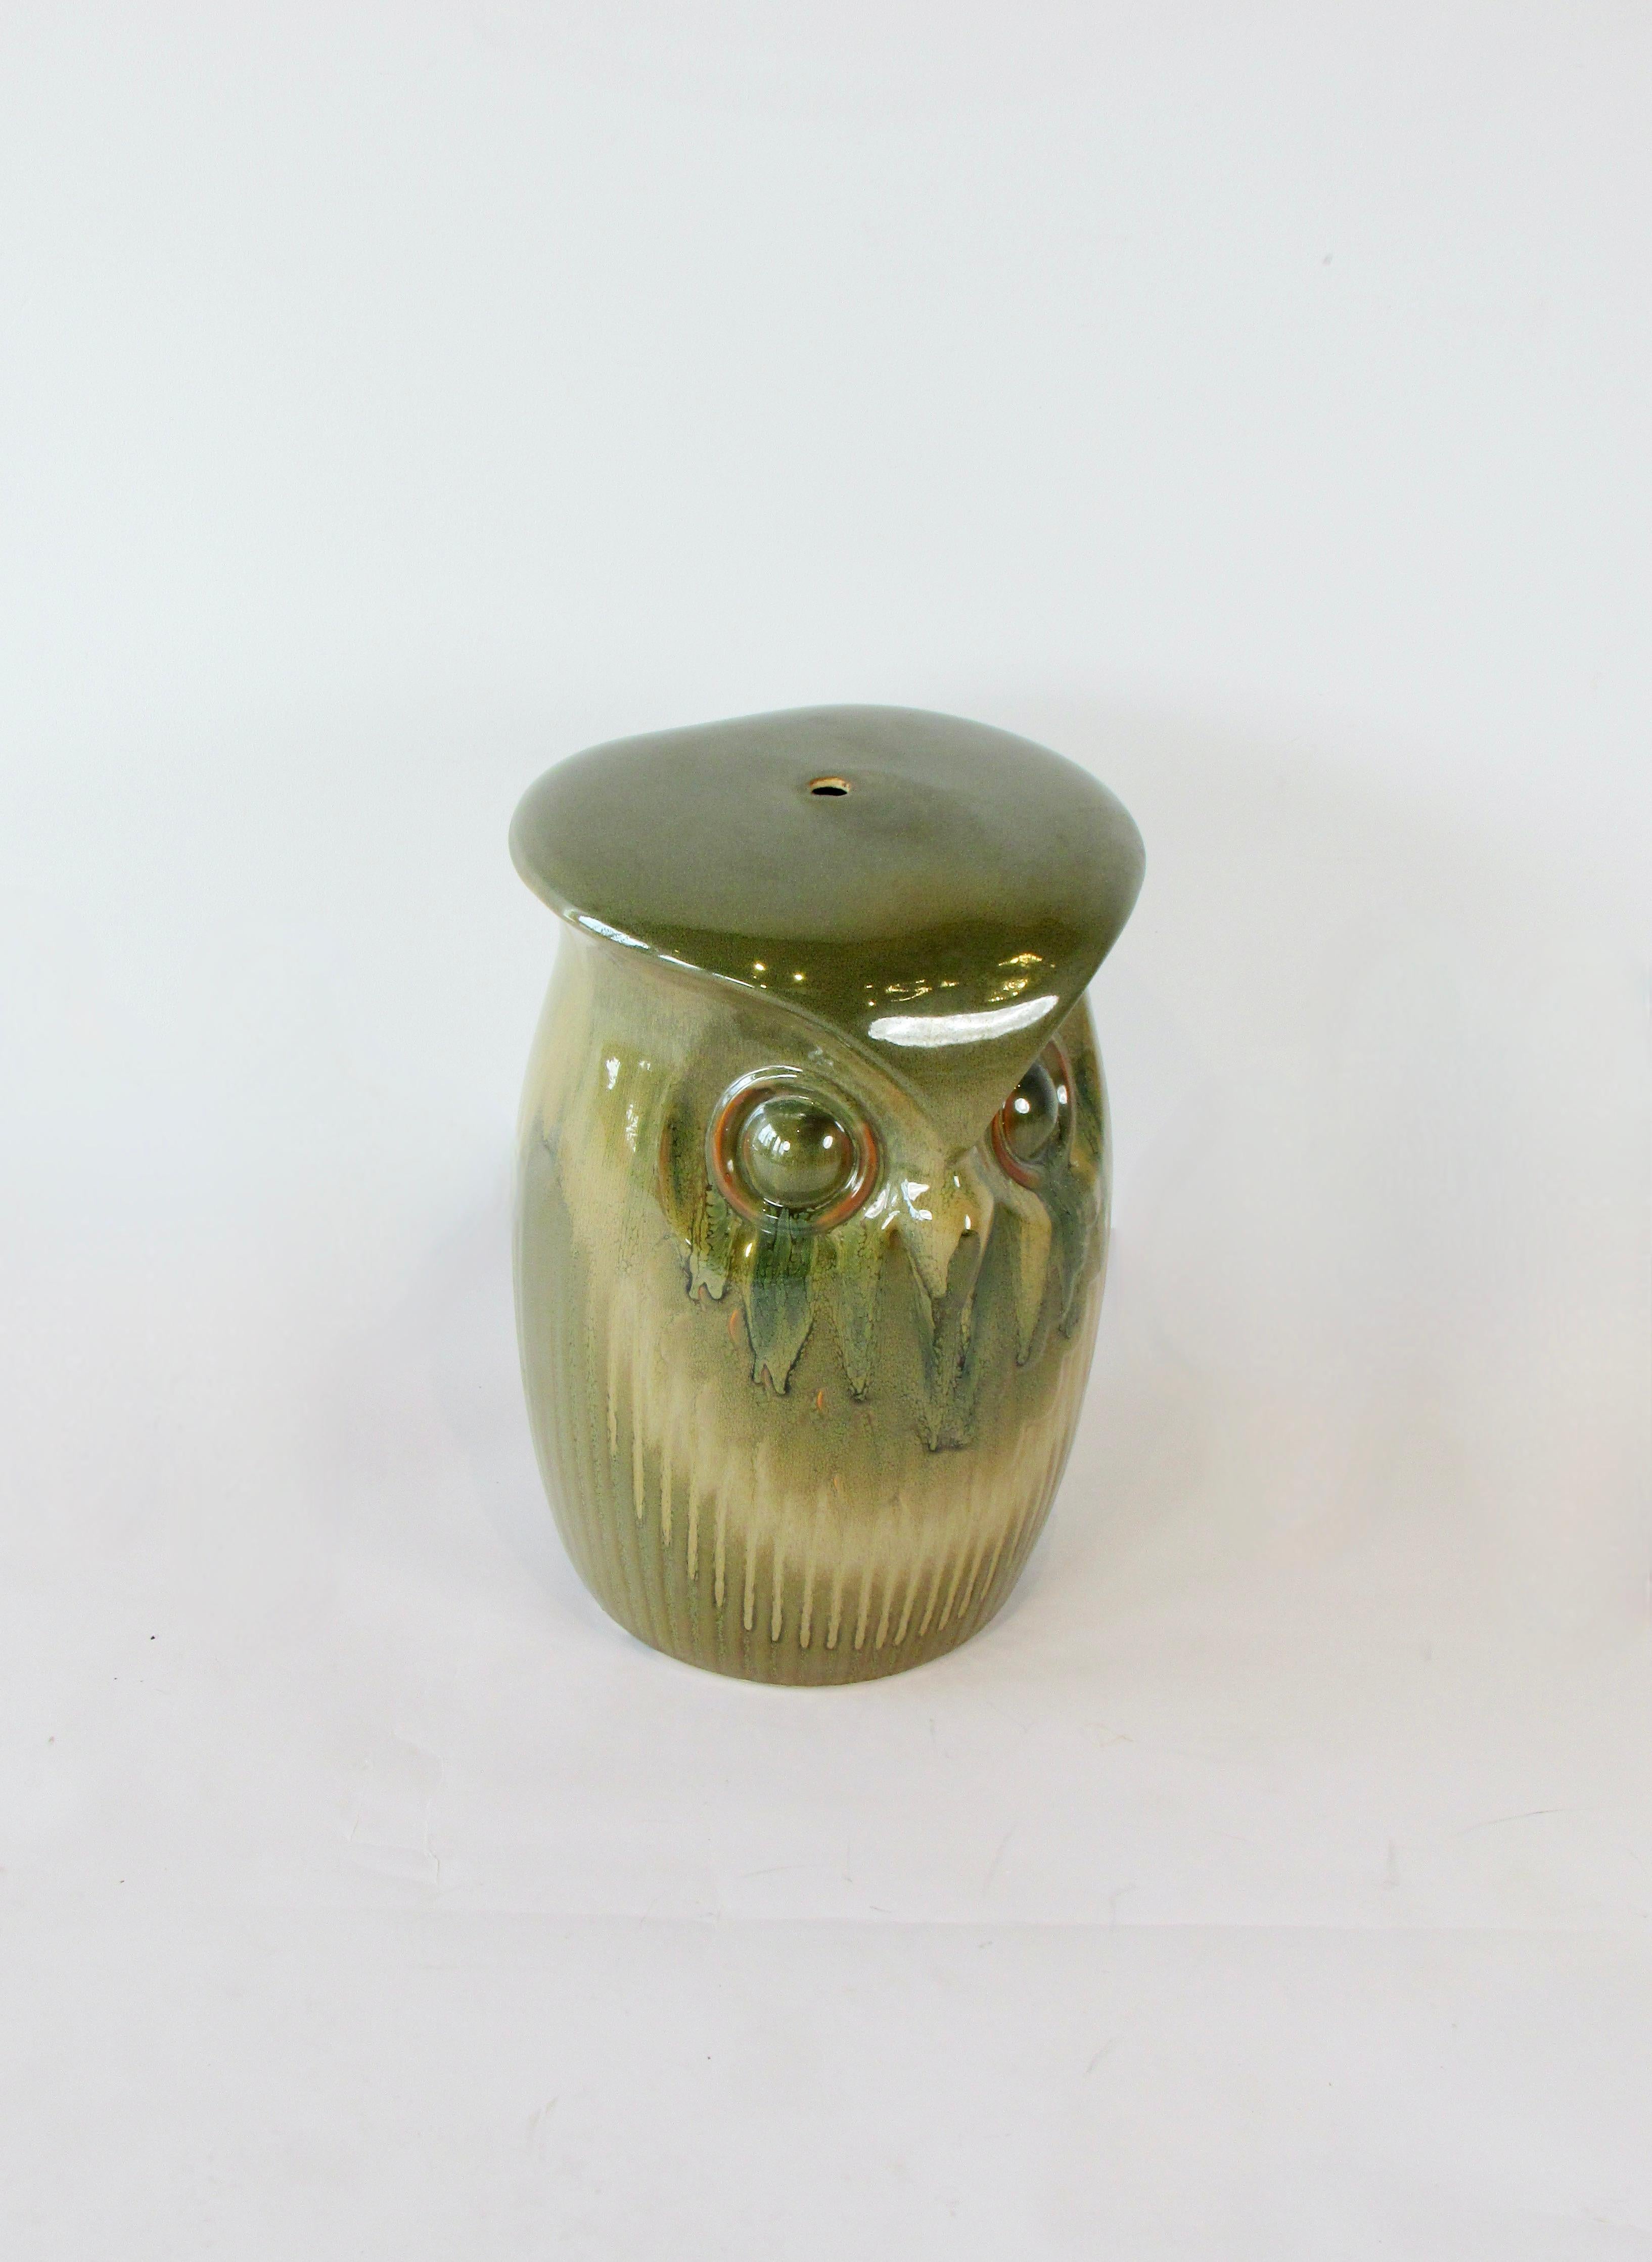 Beautifully glazed garden bench or stool with the face of an owl on either side.